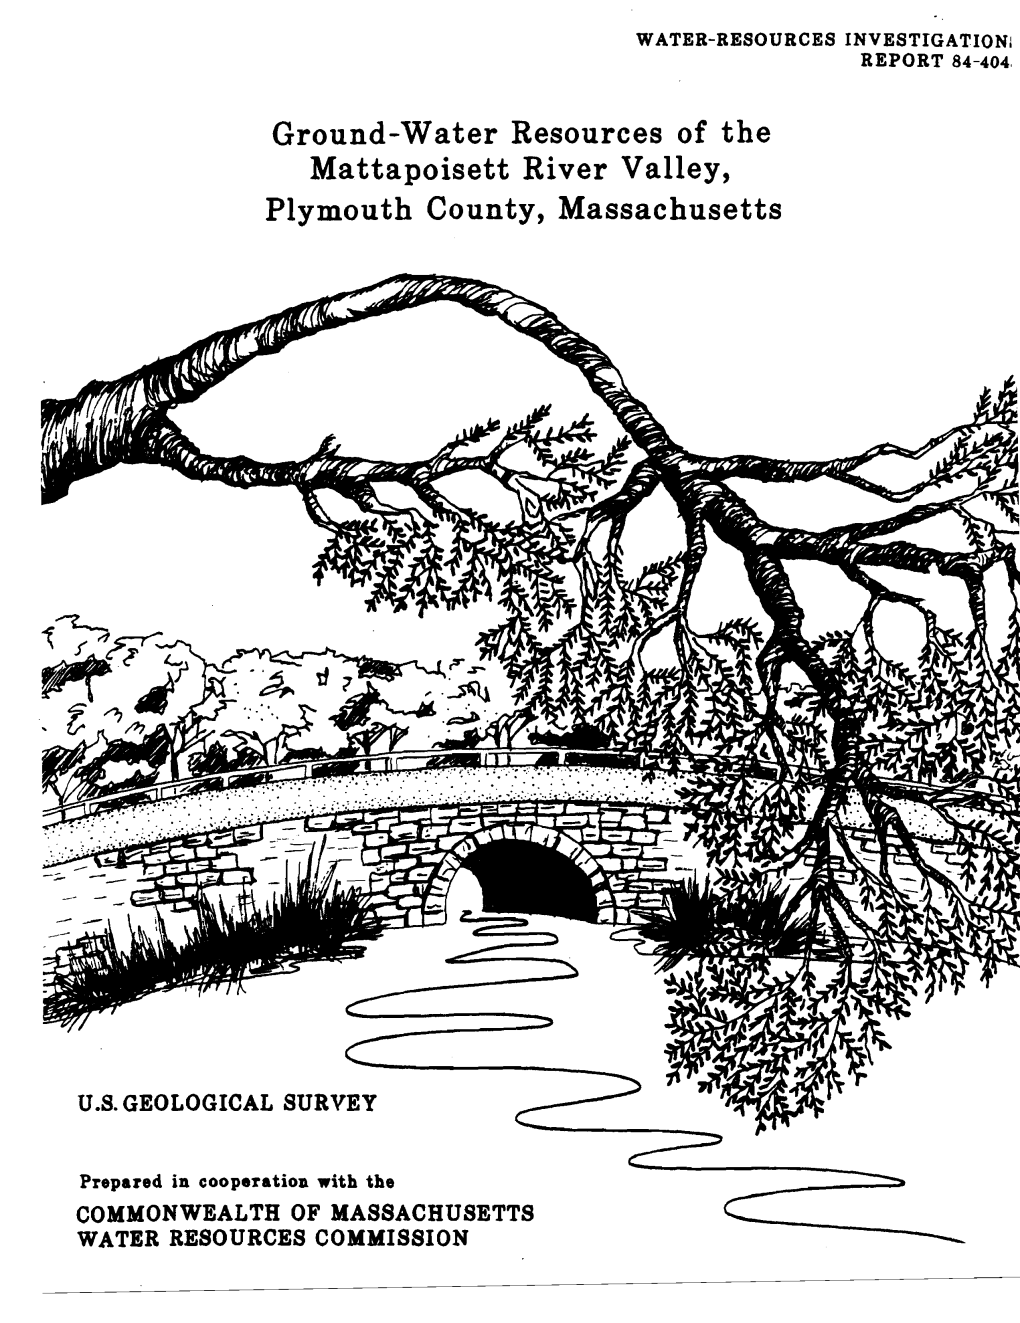 Ground-Water Resources of the Mattapoisett River Valley, Plymouth County, Massachusetts